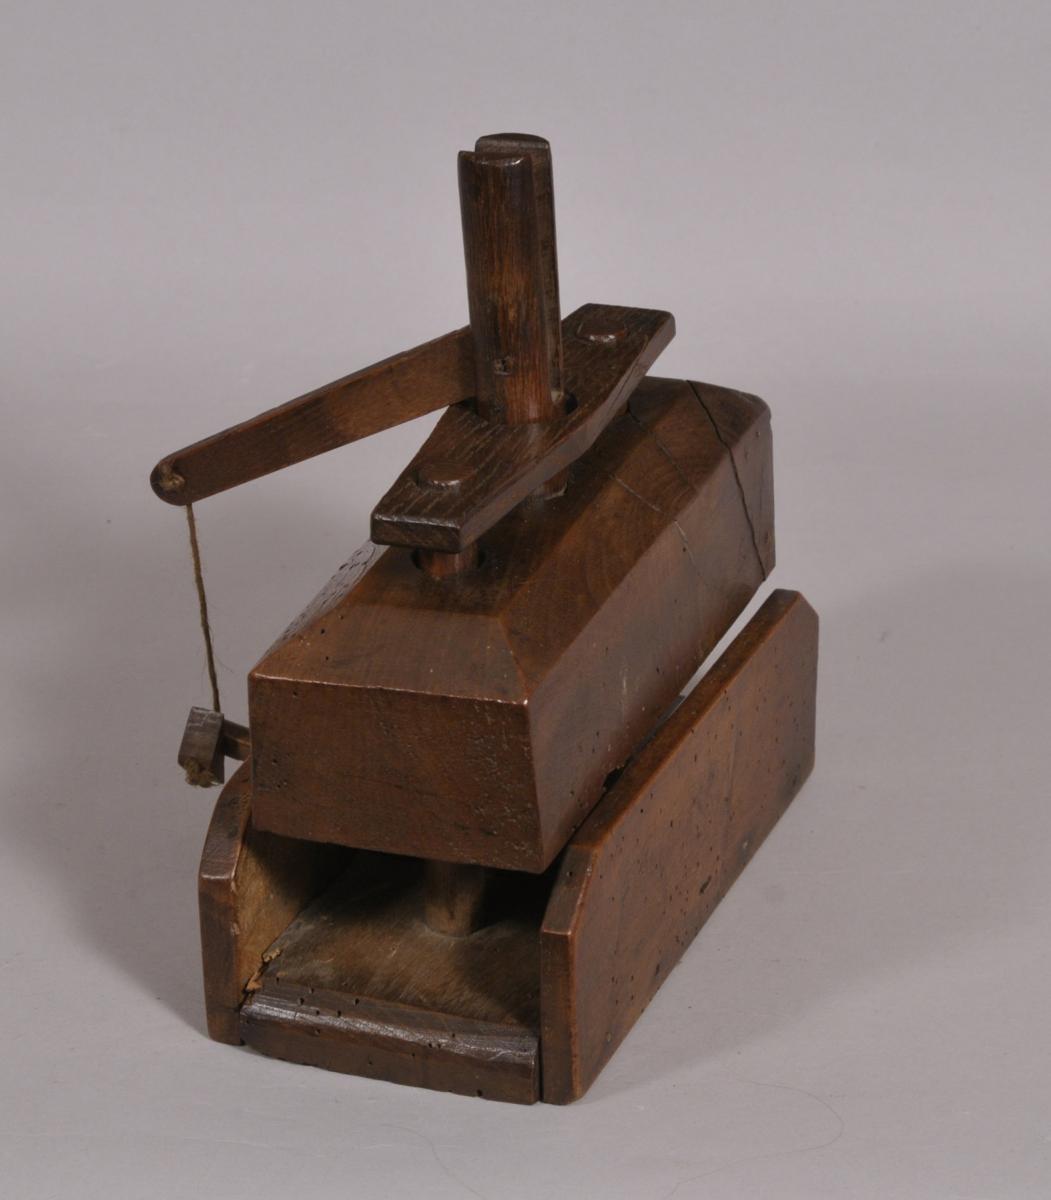 S/4317 Antique Treen 19th Century Drop Weight Mouse Trap